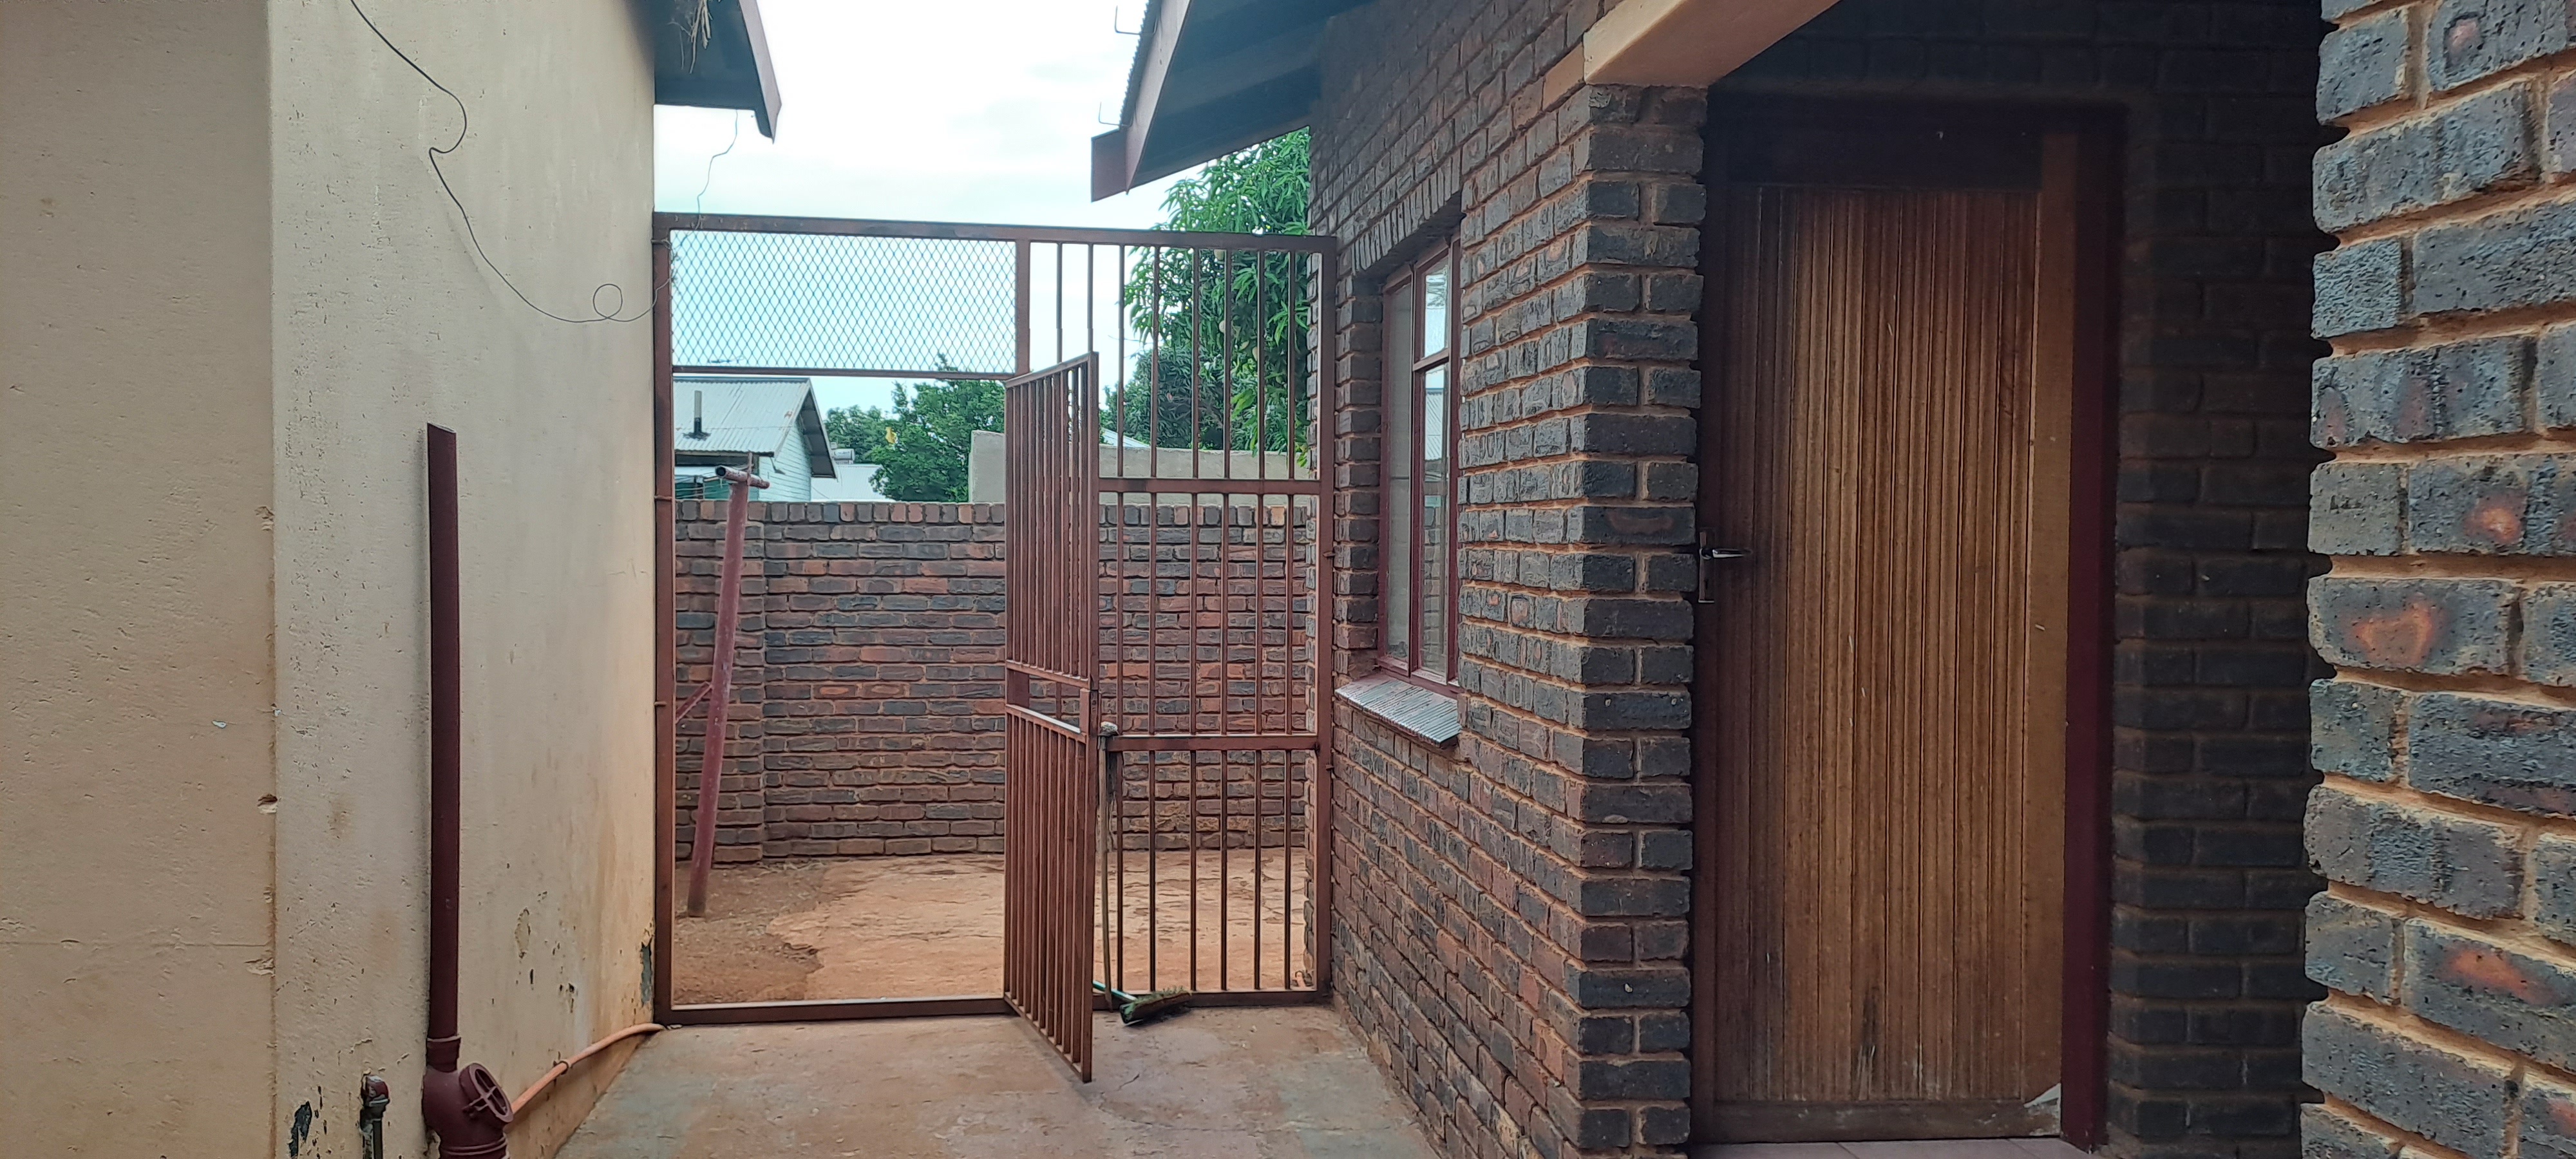 5 Bedroom Property for Sale in Lebowakgomo Zone A Limpopo